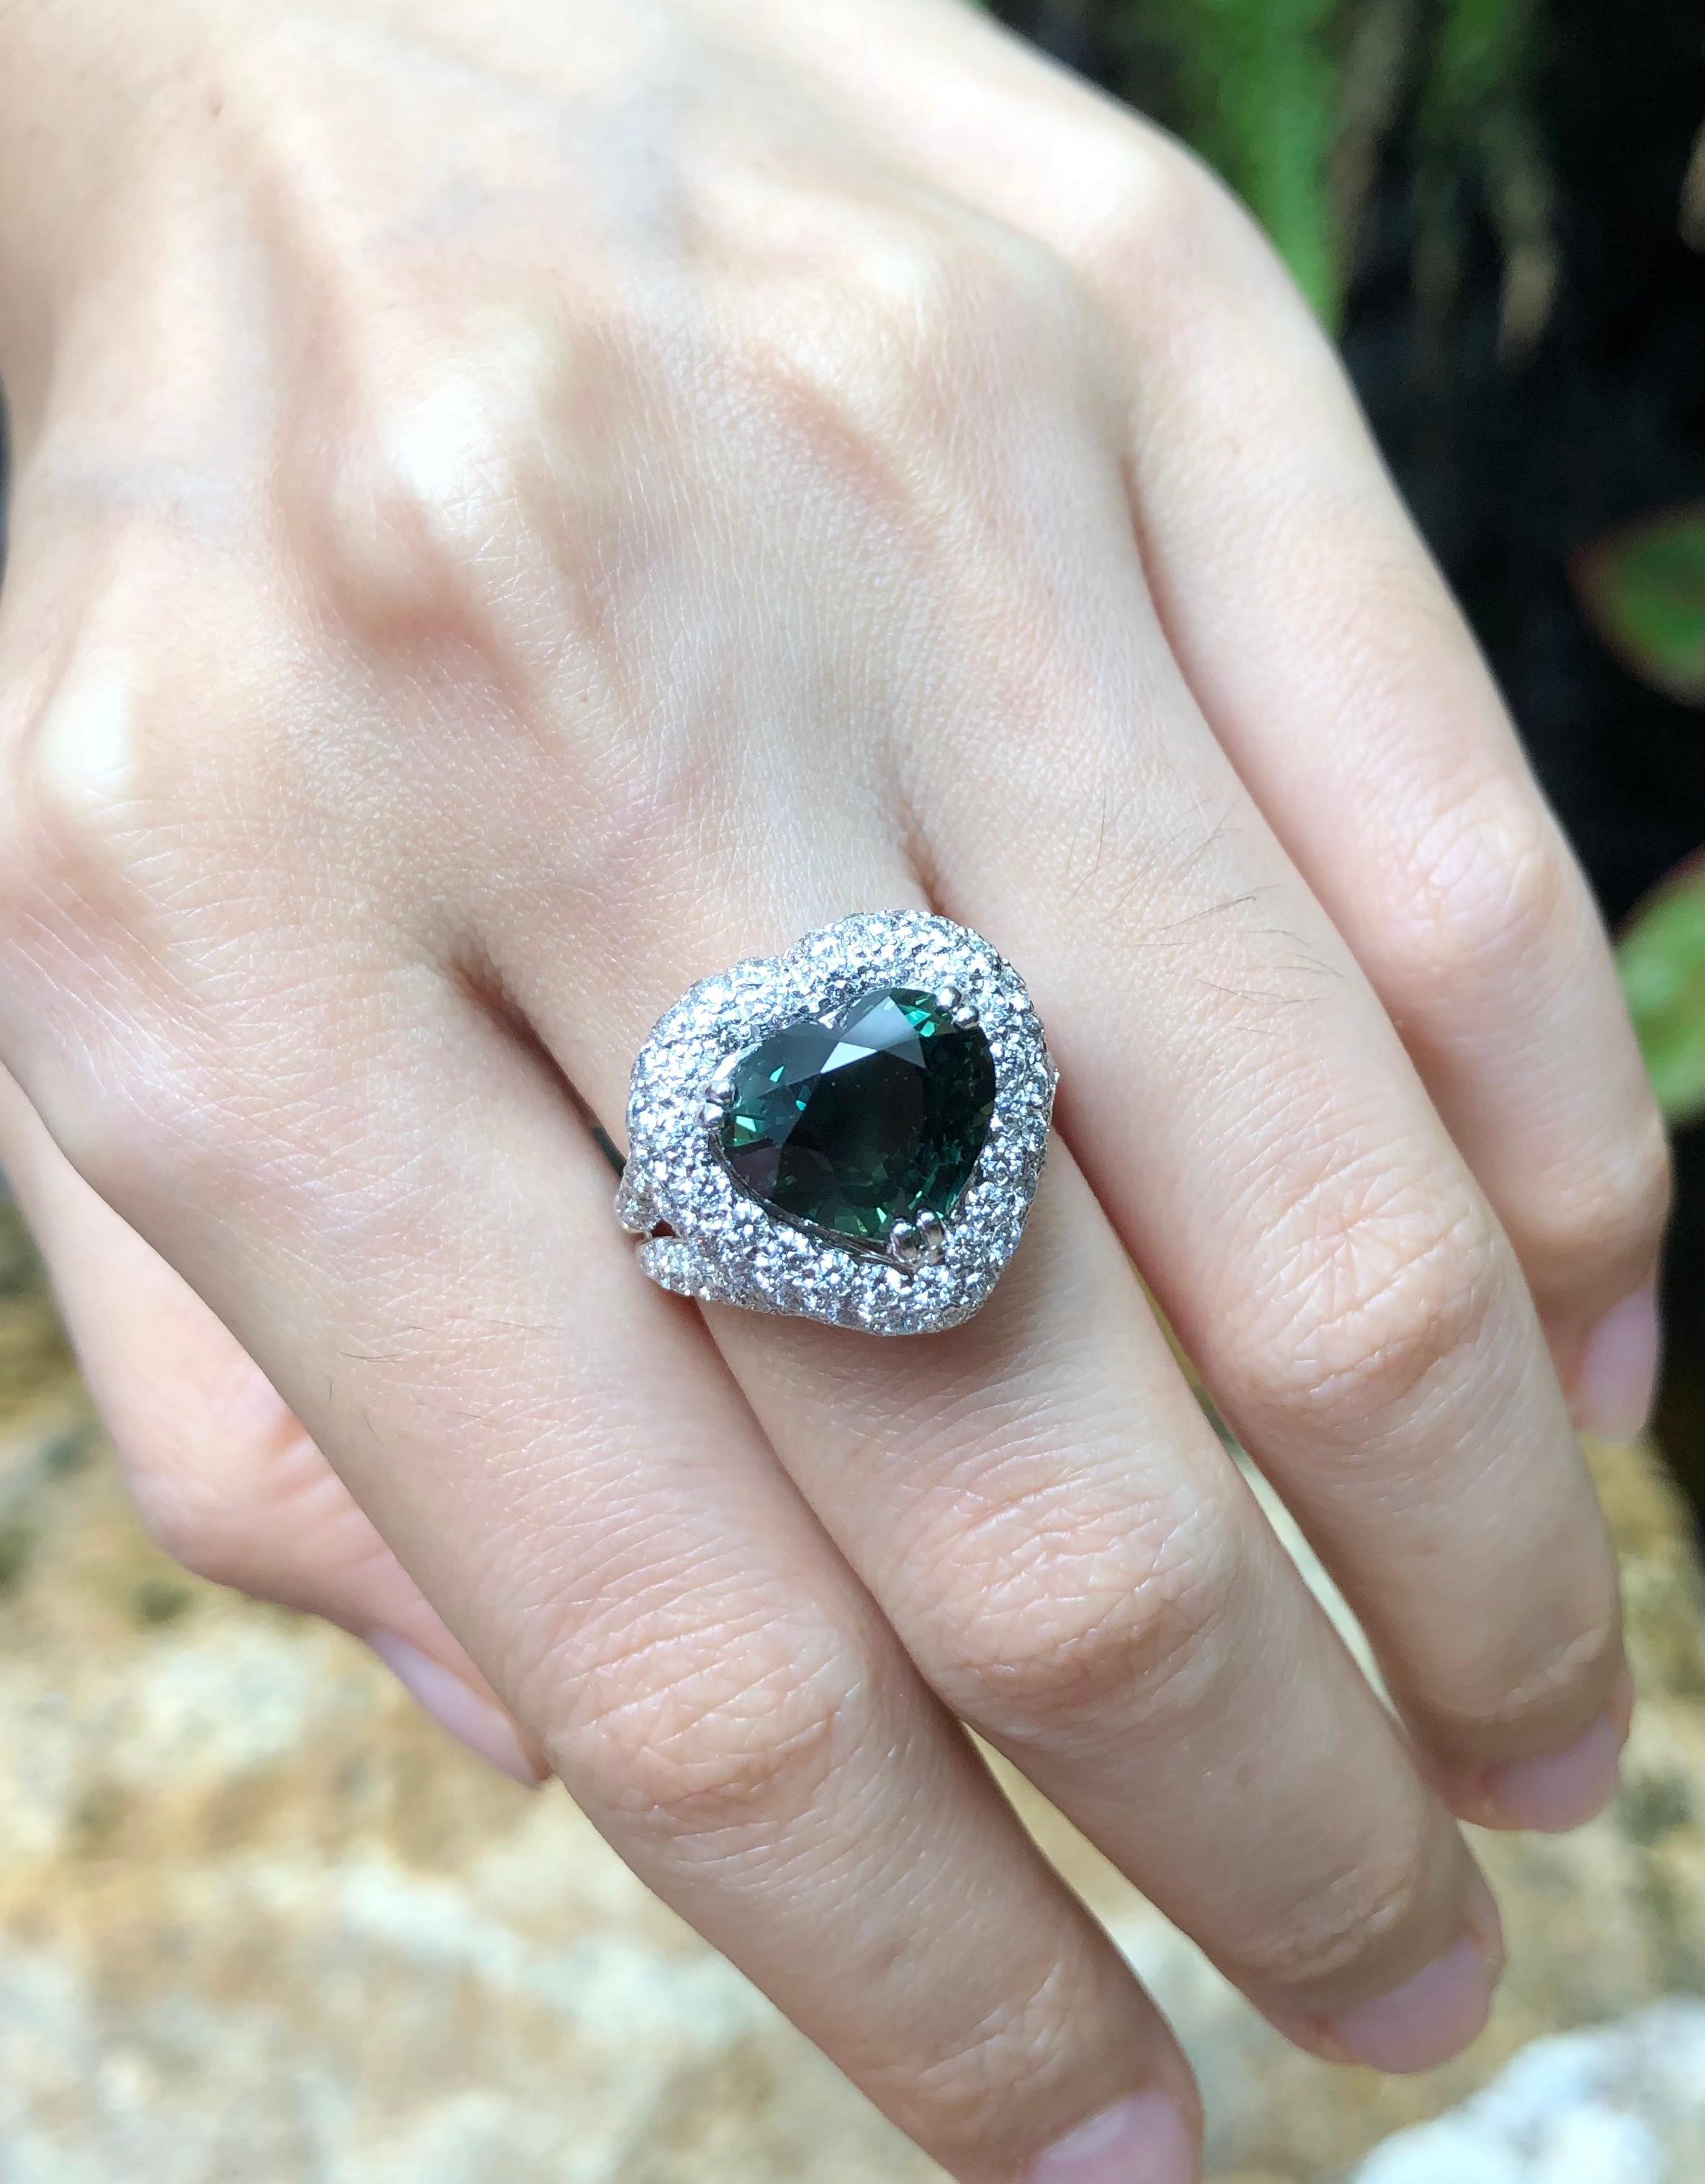 Green Sapphire 5.04 carats with Diamond 2.07 carats Ring set in 18 Karat White Gold Settings

Width:  1.7 cm 
Length:  1.6 cm
Ring Size: 51
Total Weight: 9.18 grams

